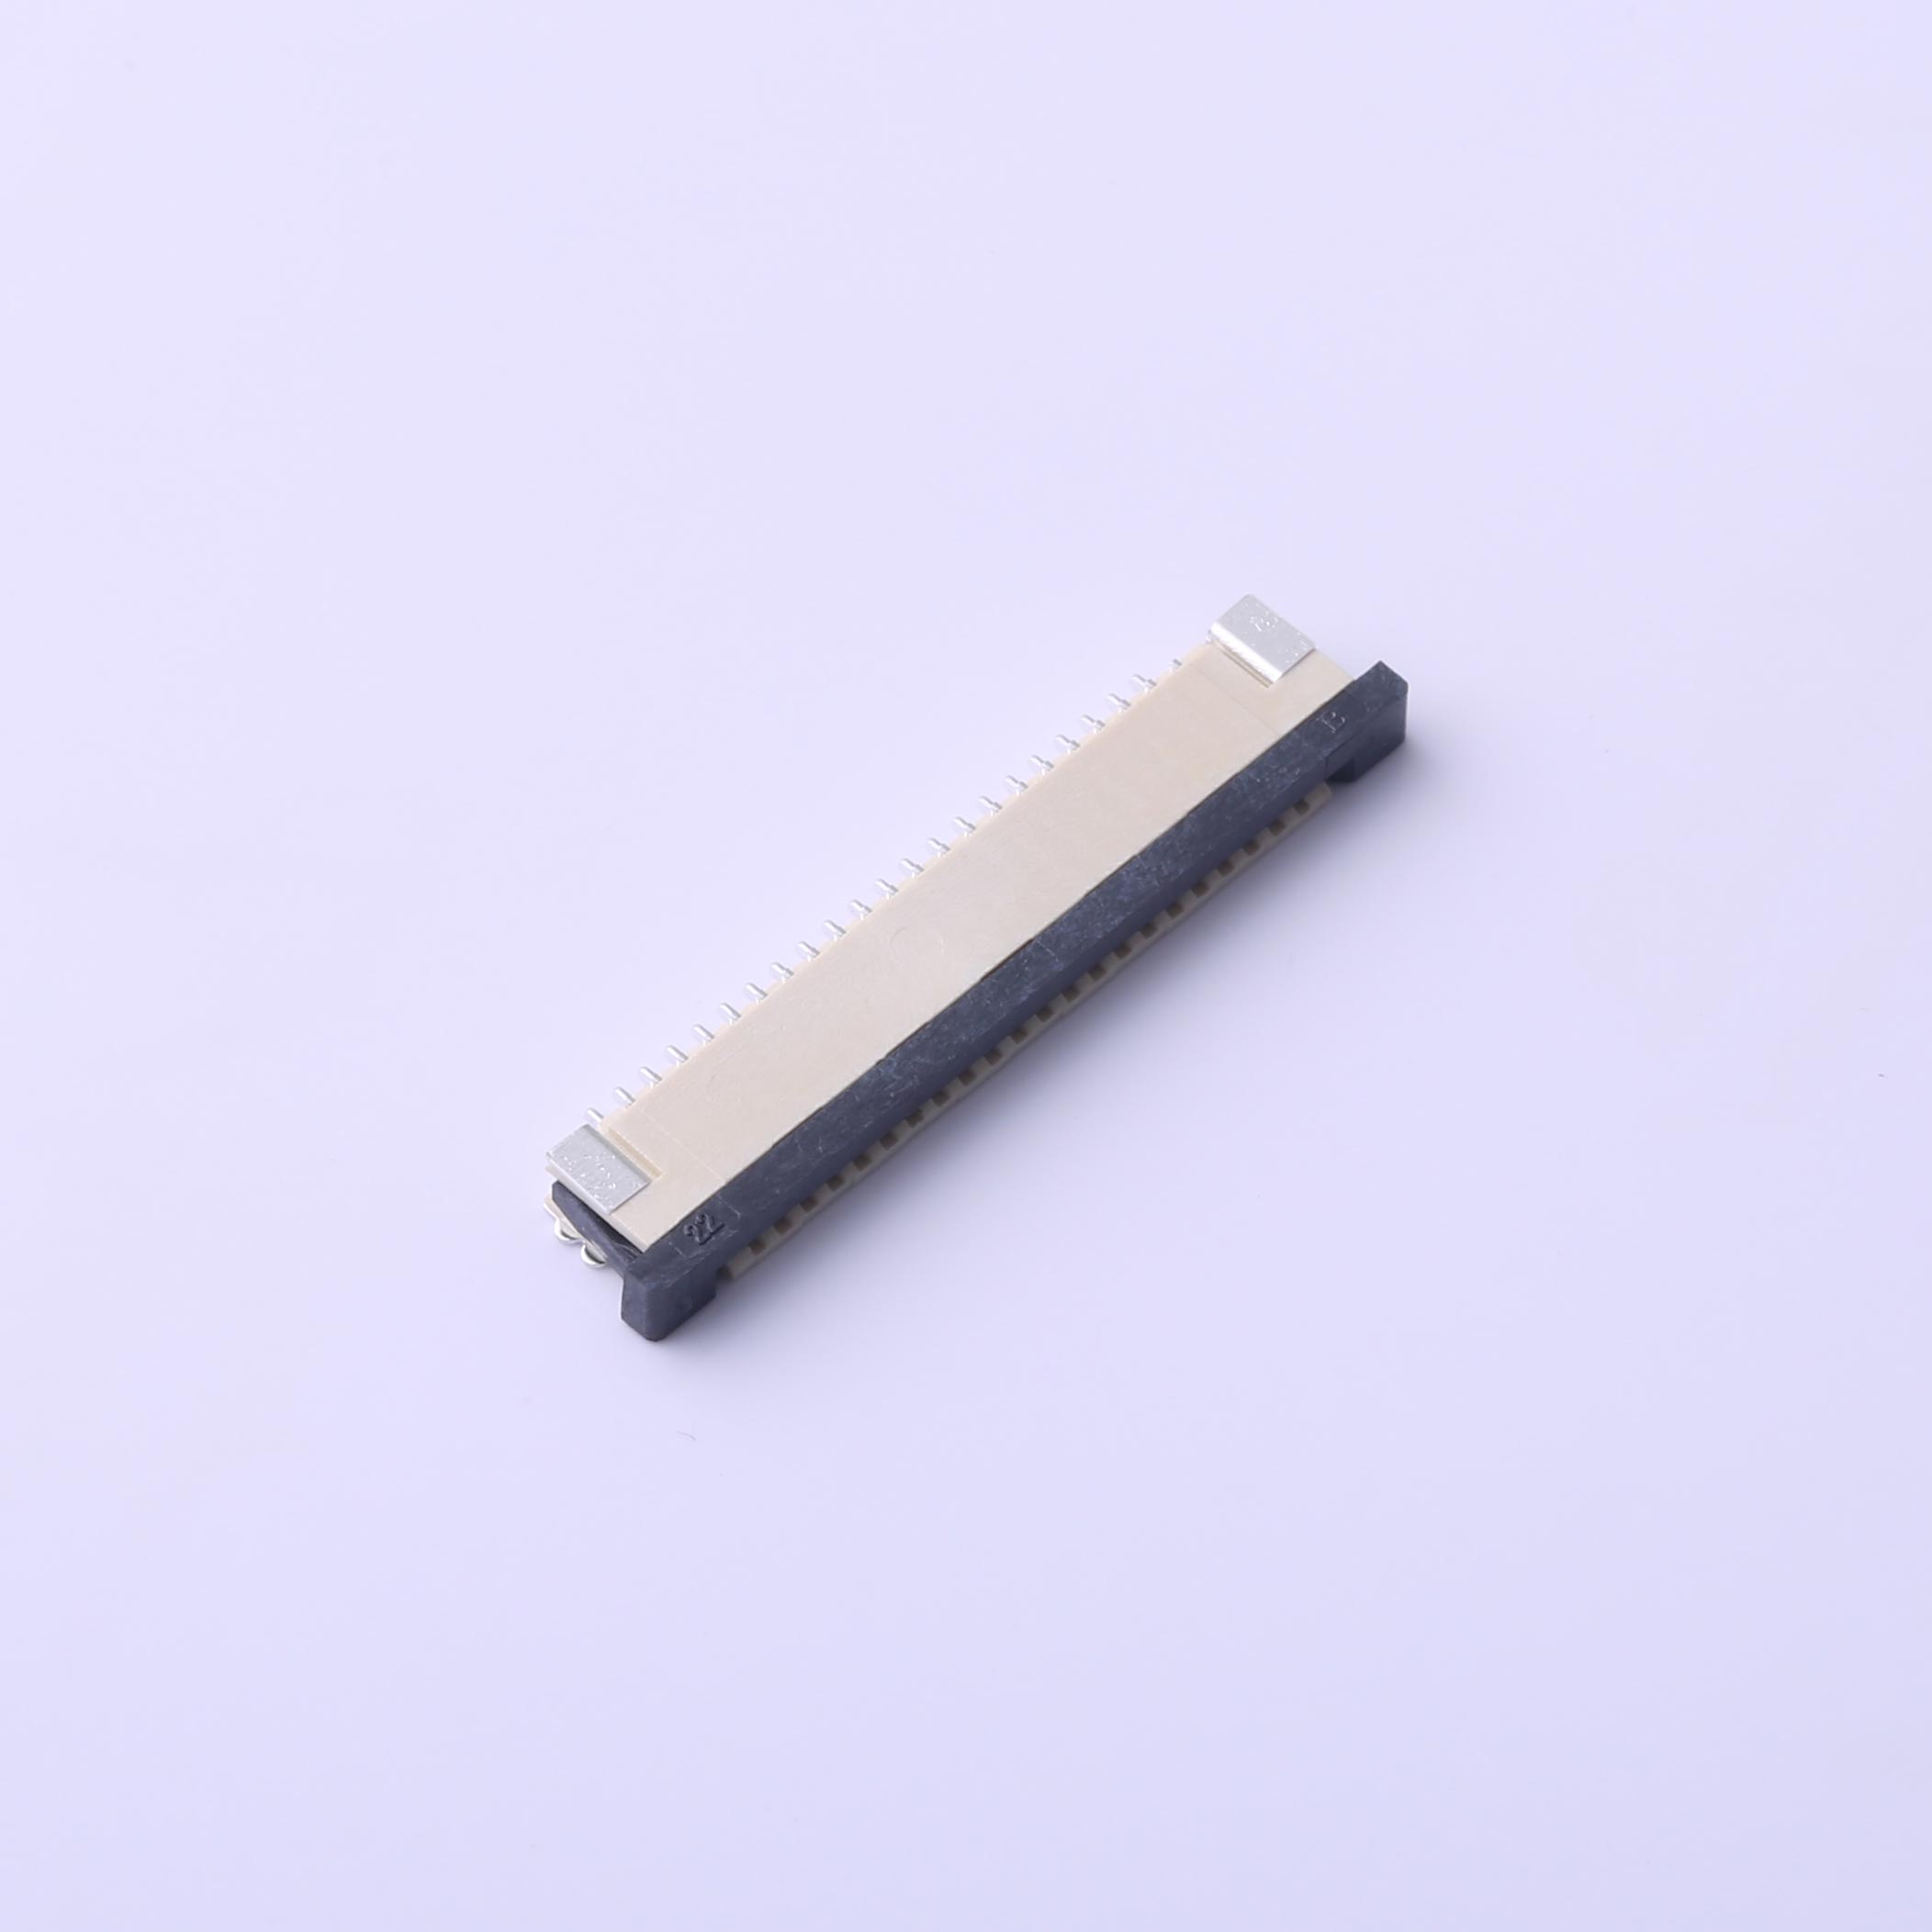 Kinghelm FFC/FPC connector 1.0mm 22pin H2.5mm - KH-CL1.0-H2.5-22pin